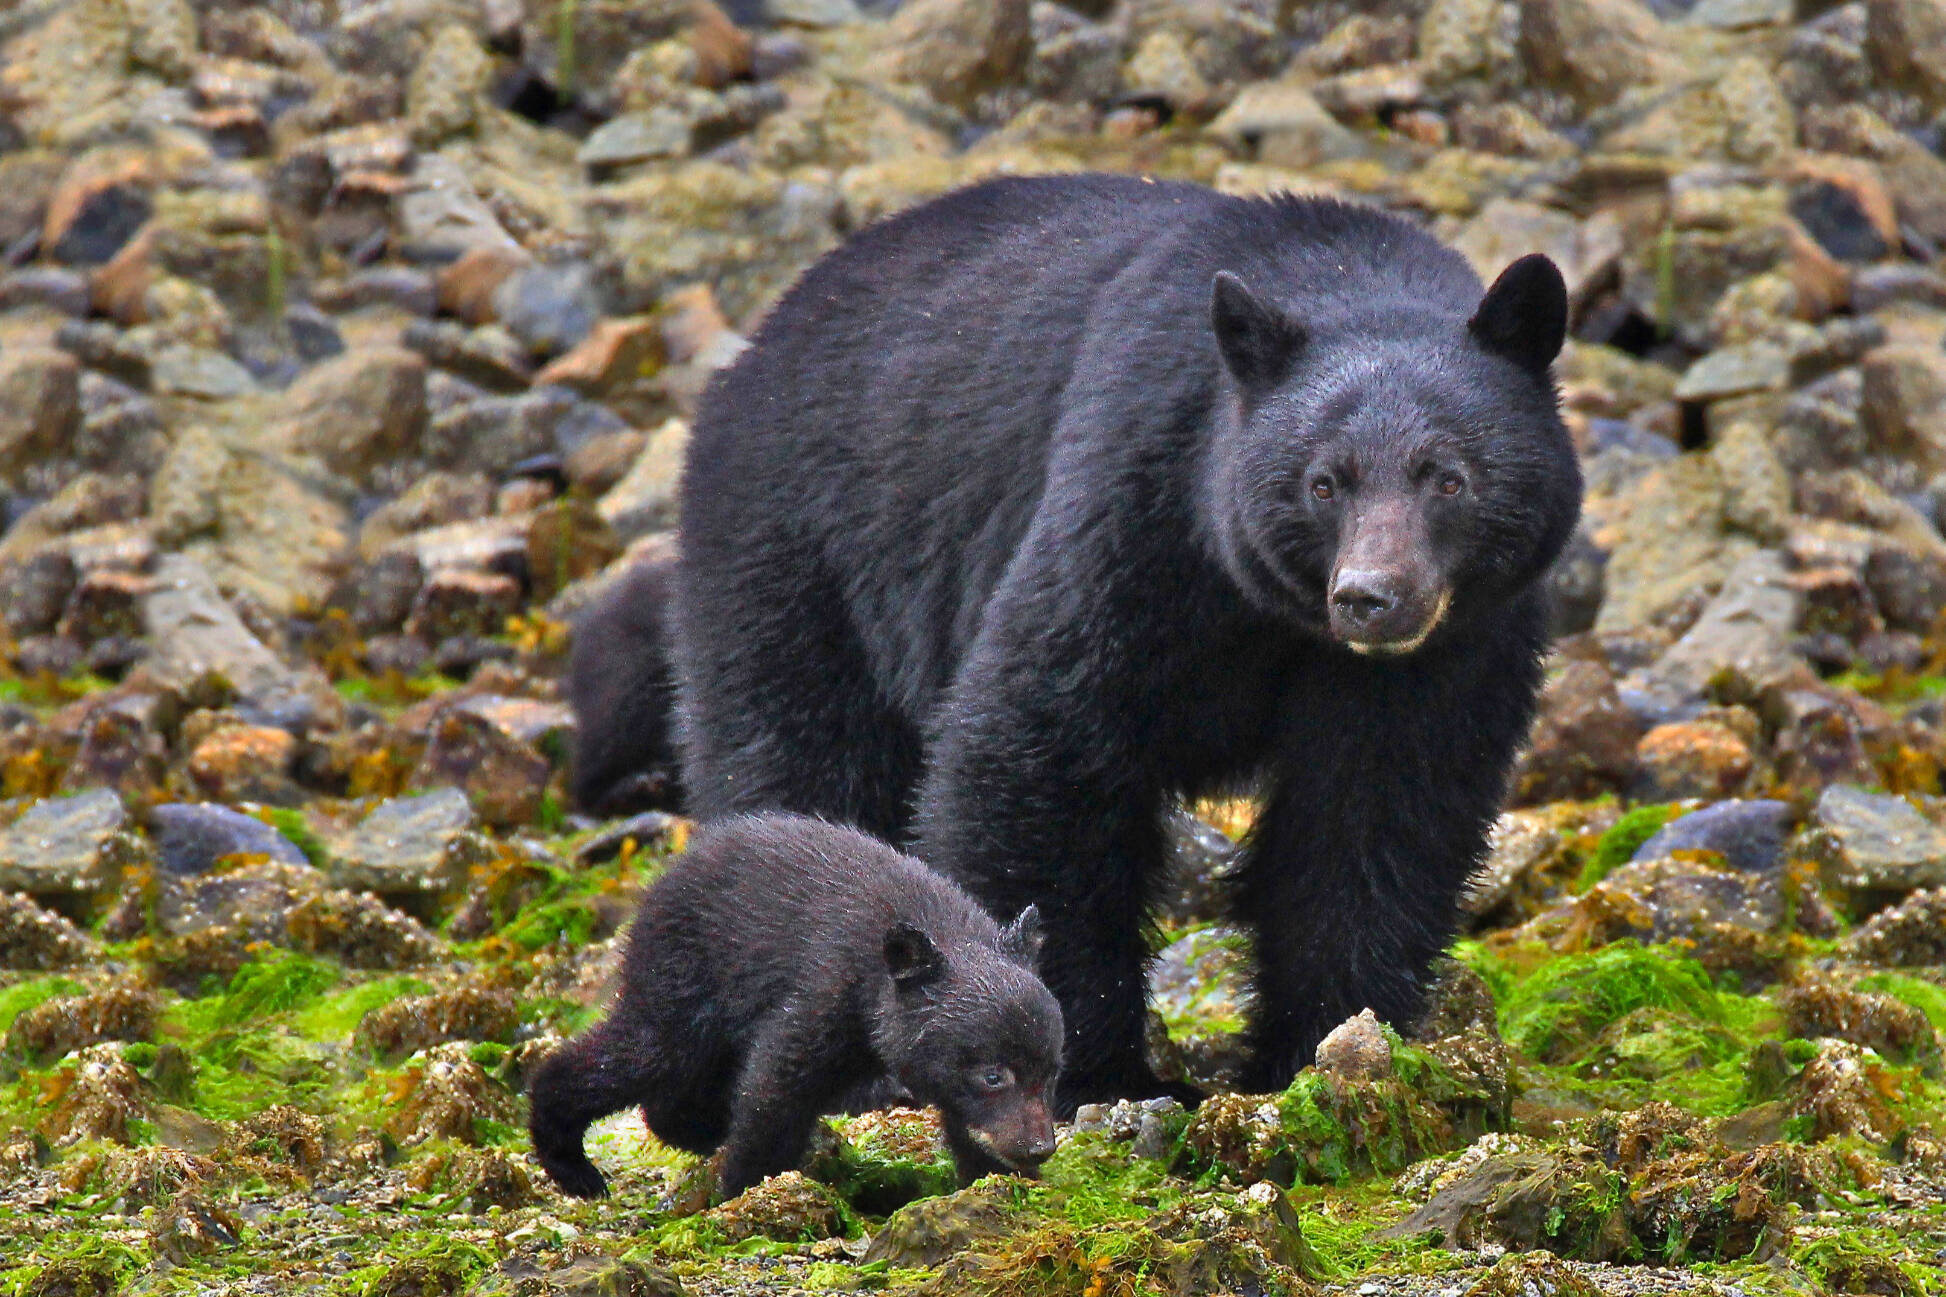 Unsecured garbage and compost fuel surge in bear sightings in Sooke -  Parksville Qualicum Beach News